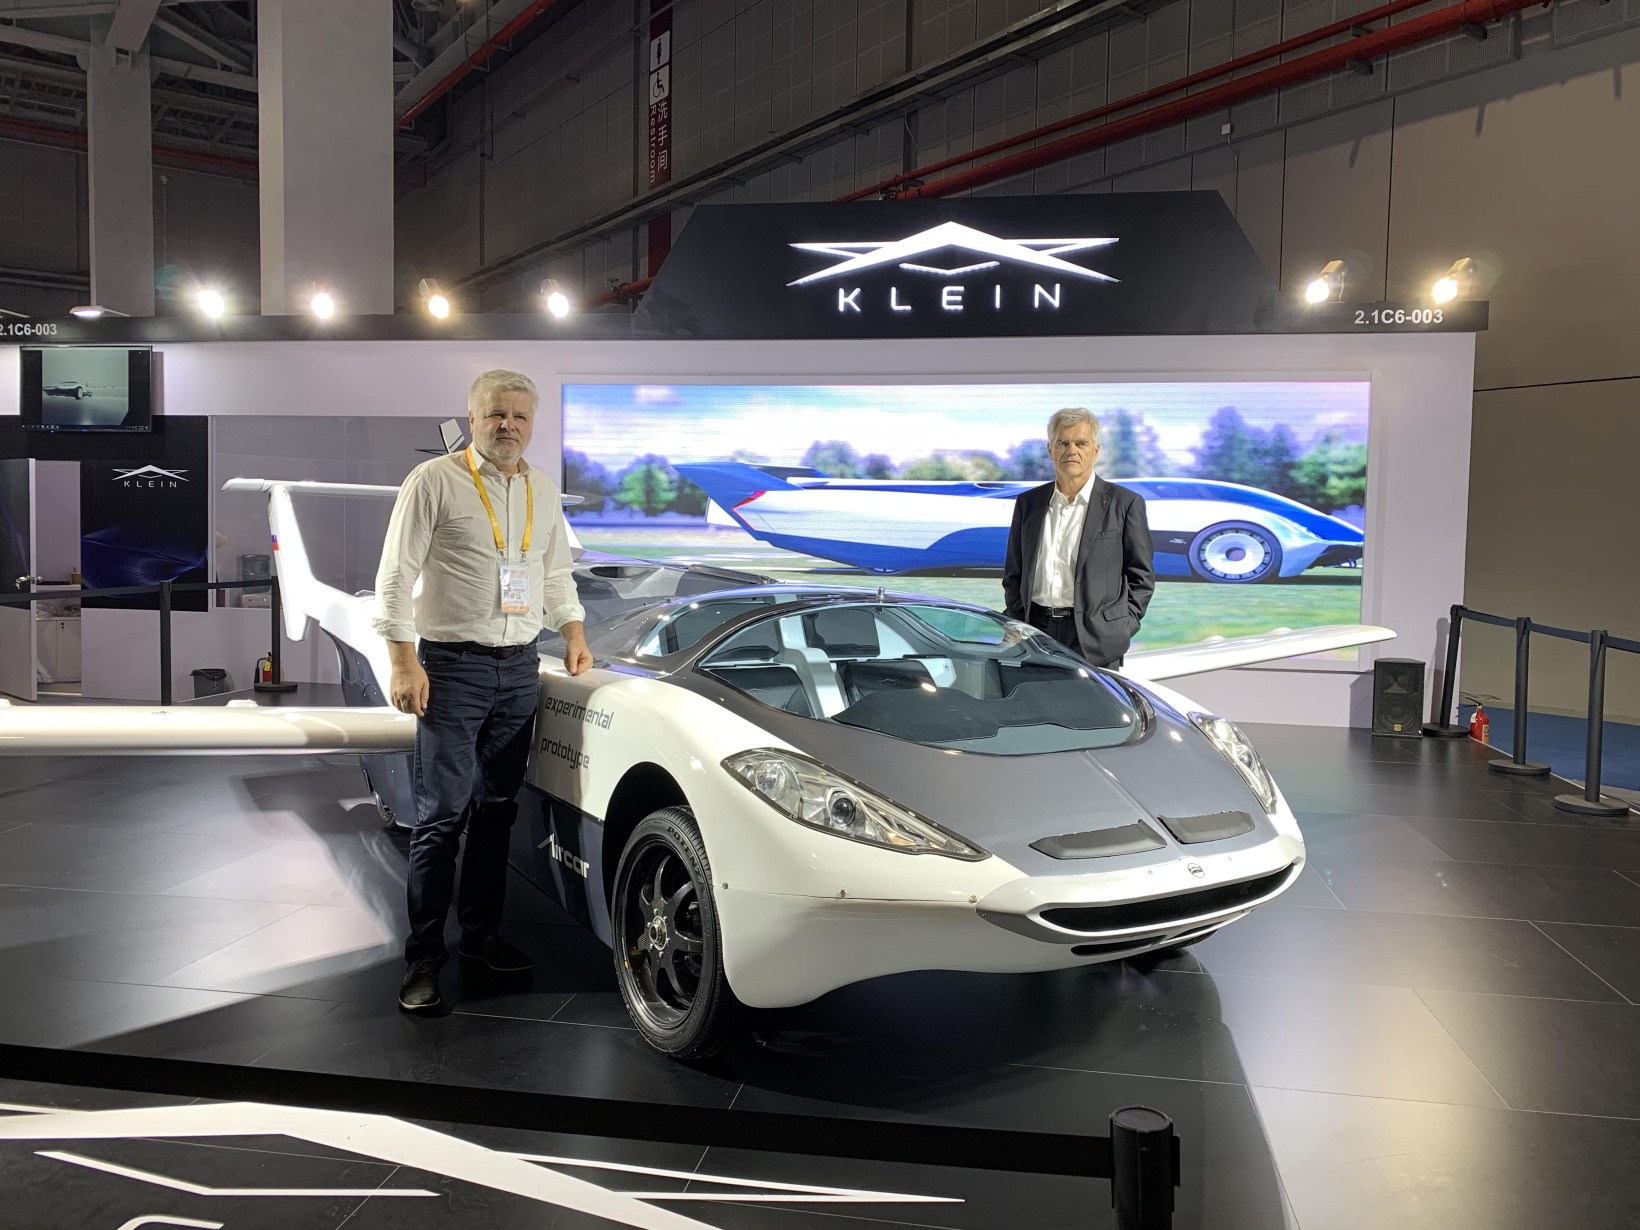 Klein Vision founders Stefan Klein and Anton Zajac standing next to the AirCar